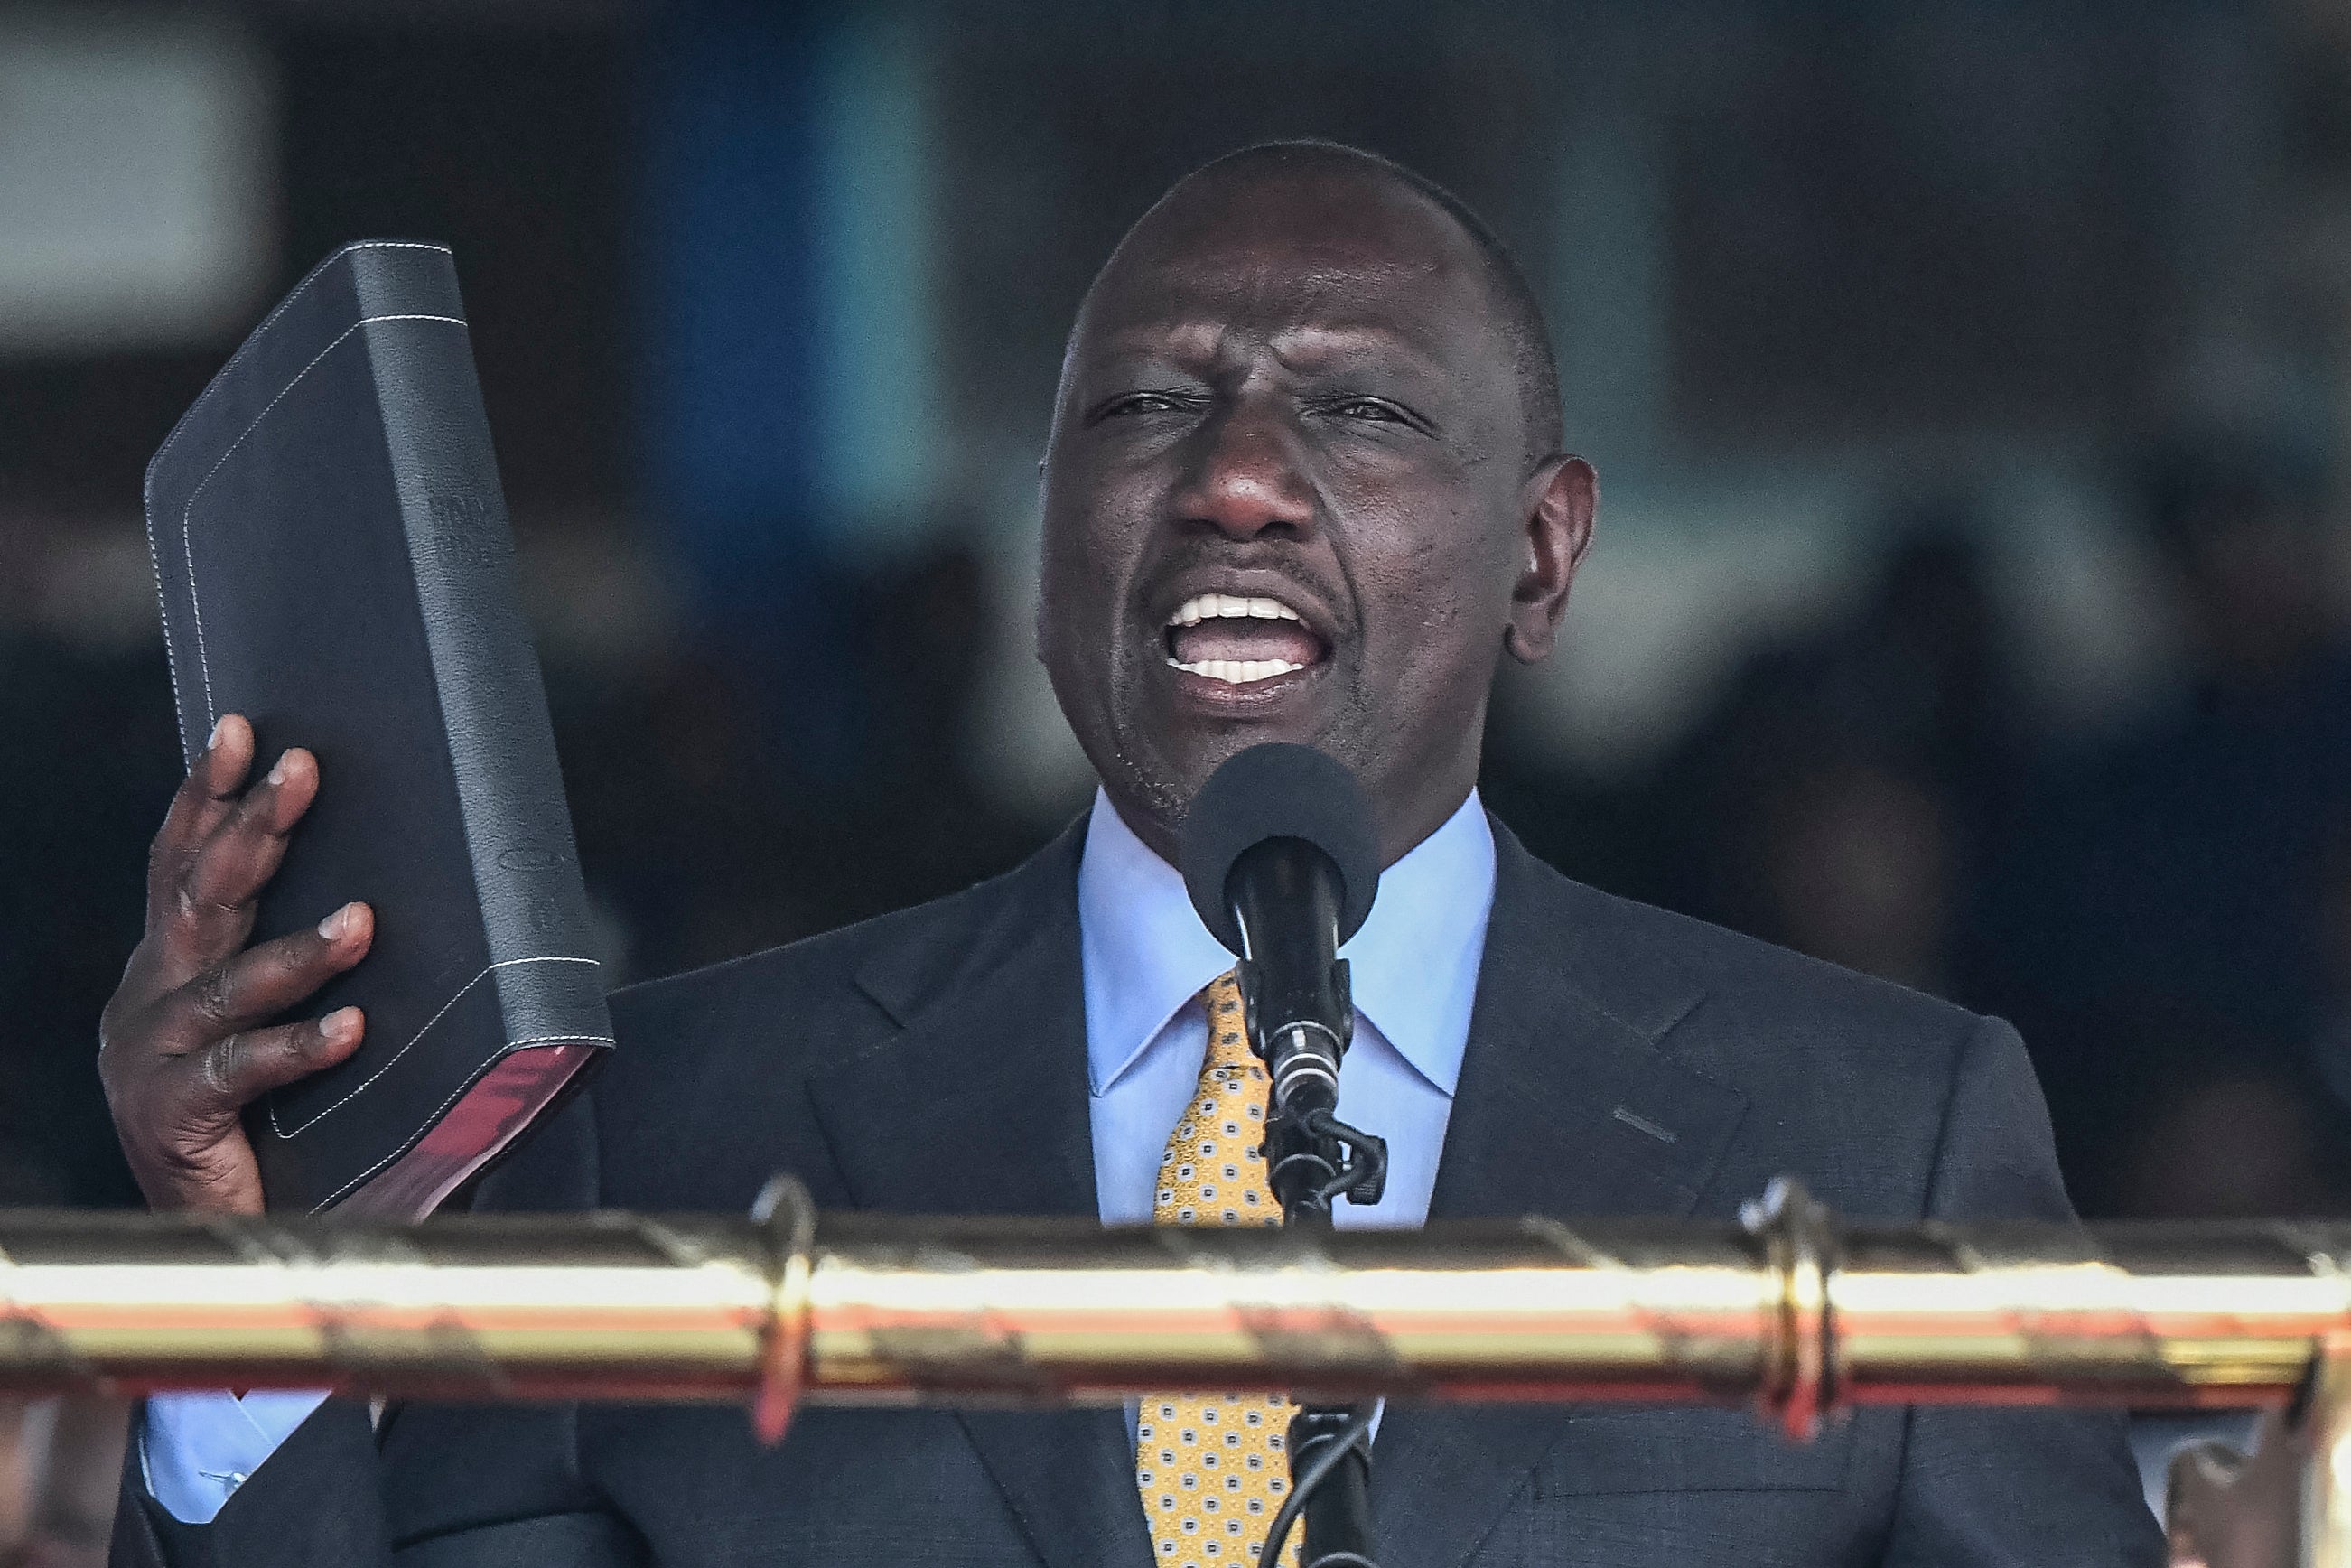 Kenya President William Ruto takes the oath of office at the Moi International Sports Center Kasarani in Nairobi, Kenya, on September 13, 2022 during the inauguration ceremony